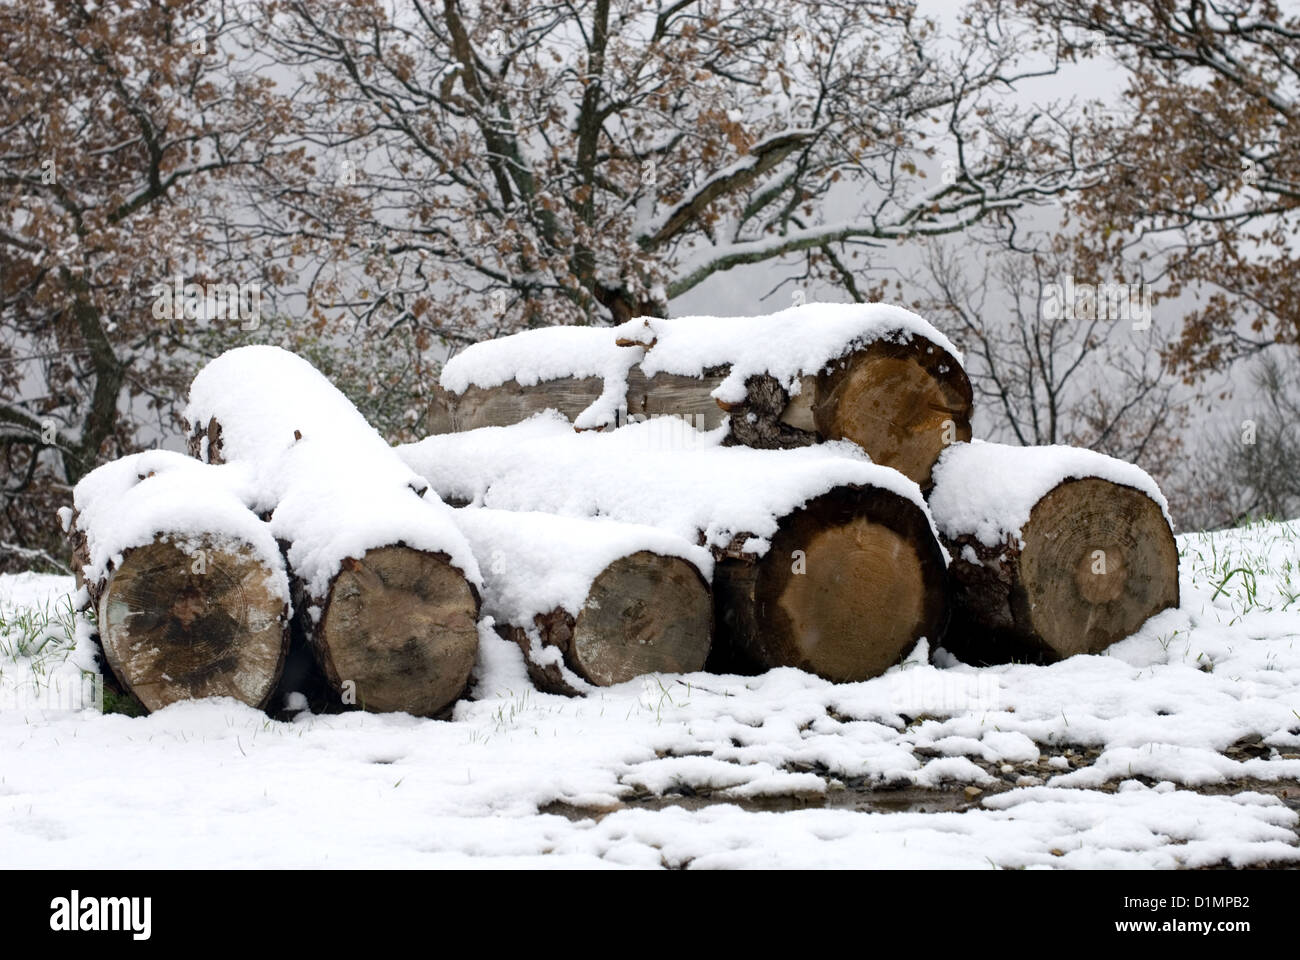 A snow-covered stack of sawn logs Stock Photo